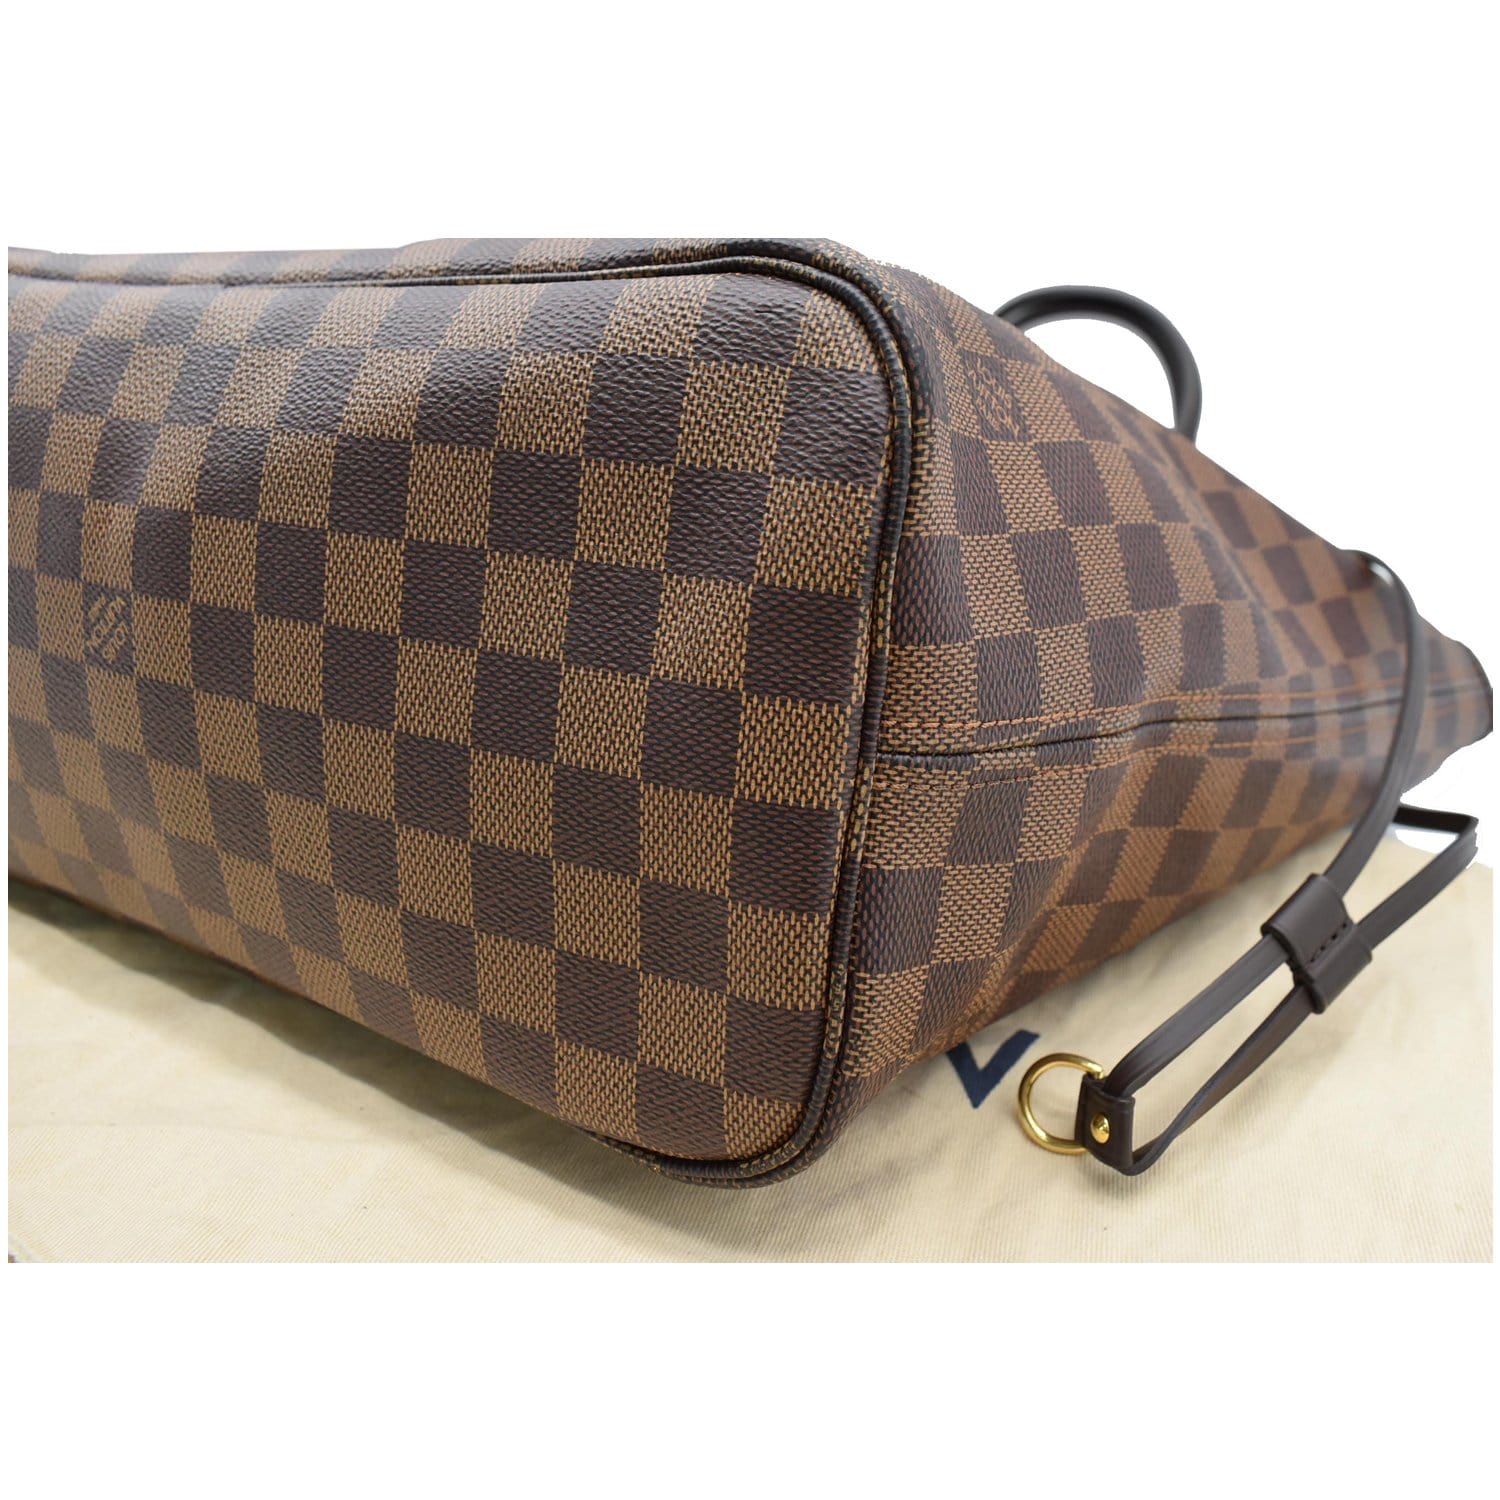 Louis Vuitton Limited Edition Monogram Bay Neverfull MM - Brown Totes,  Handbags - LOU759797